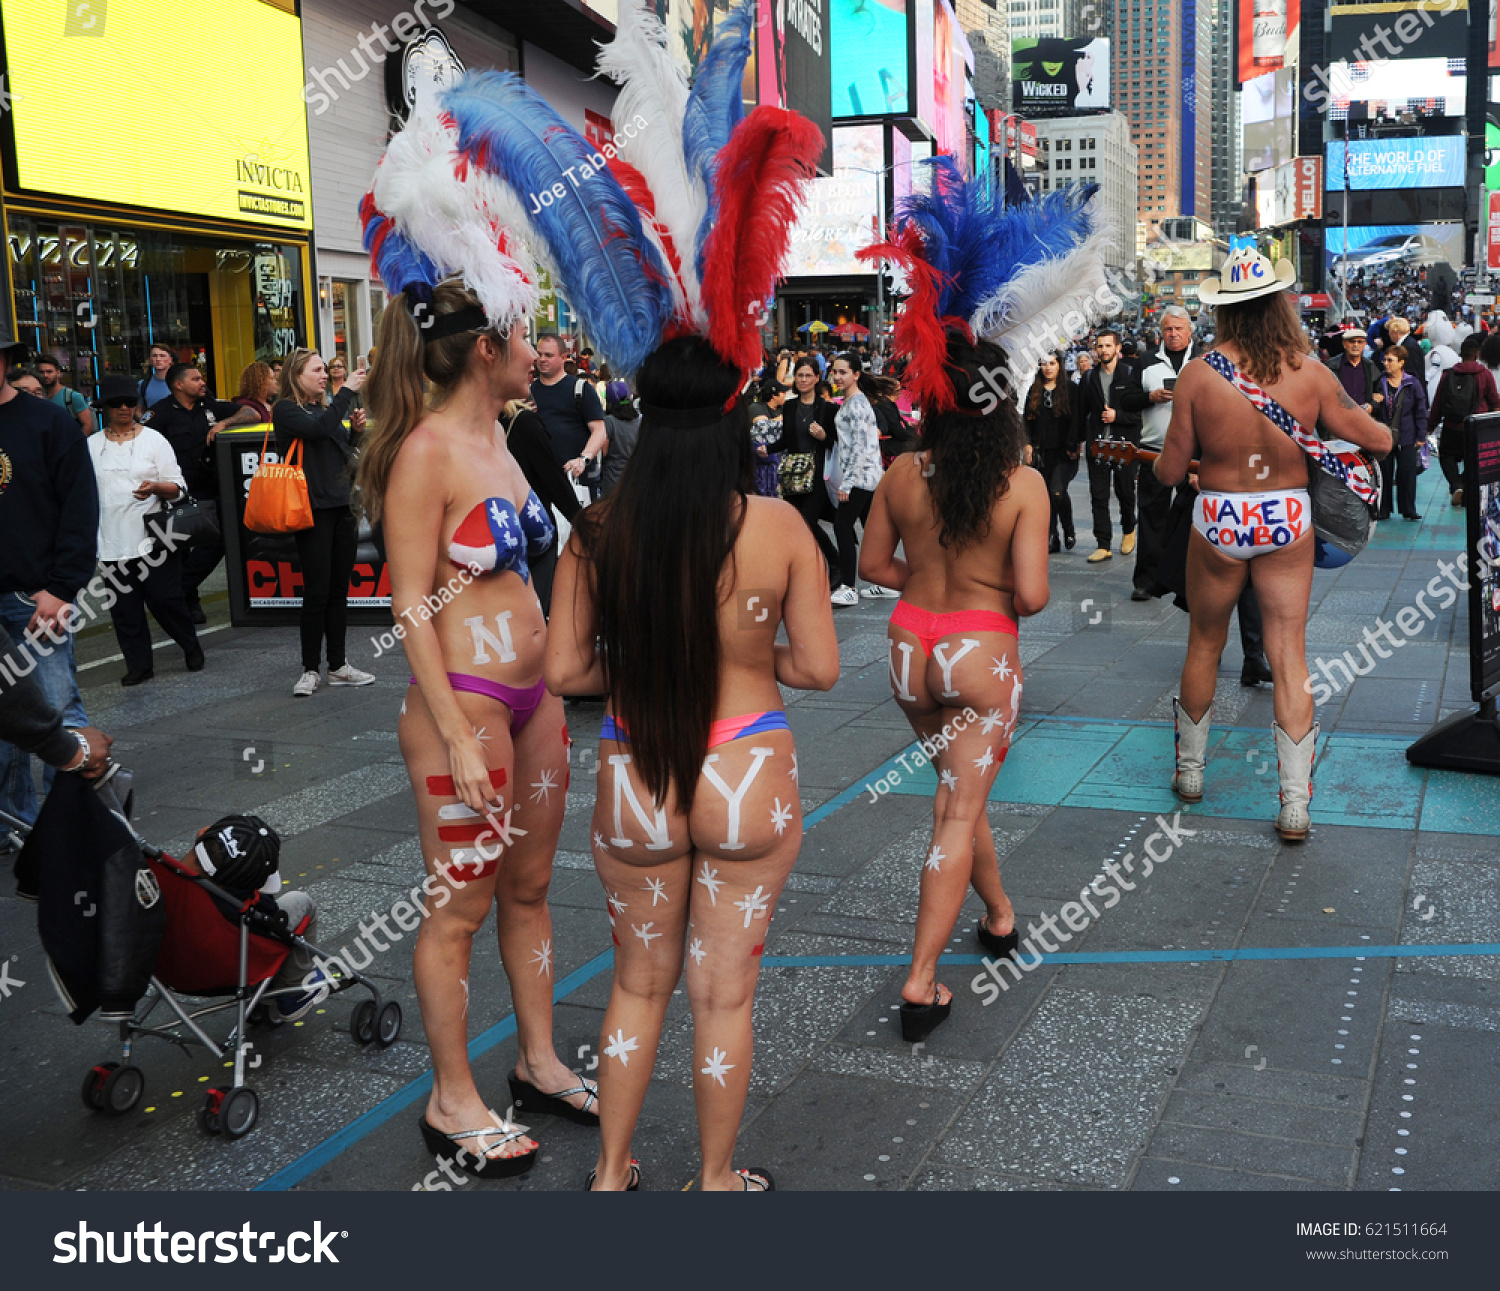 Body painting times square nude women New York New York April 2017 Stock Photo Edit Now 621511664